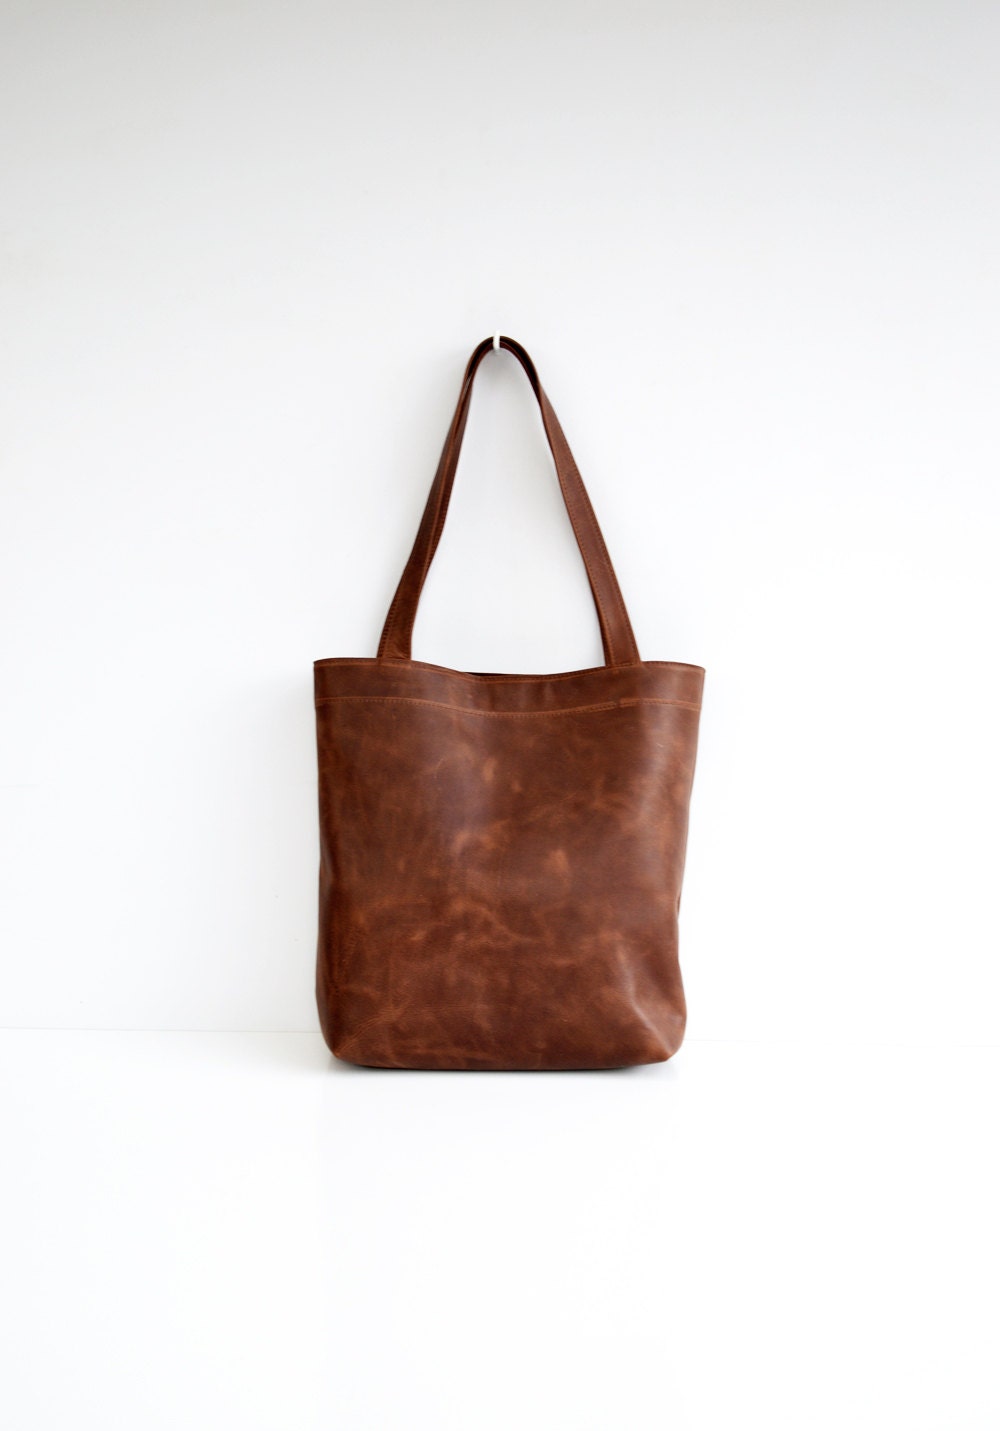 Classic leather tote bag in dark brown